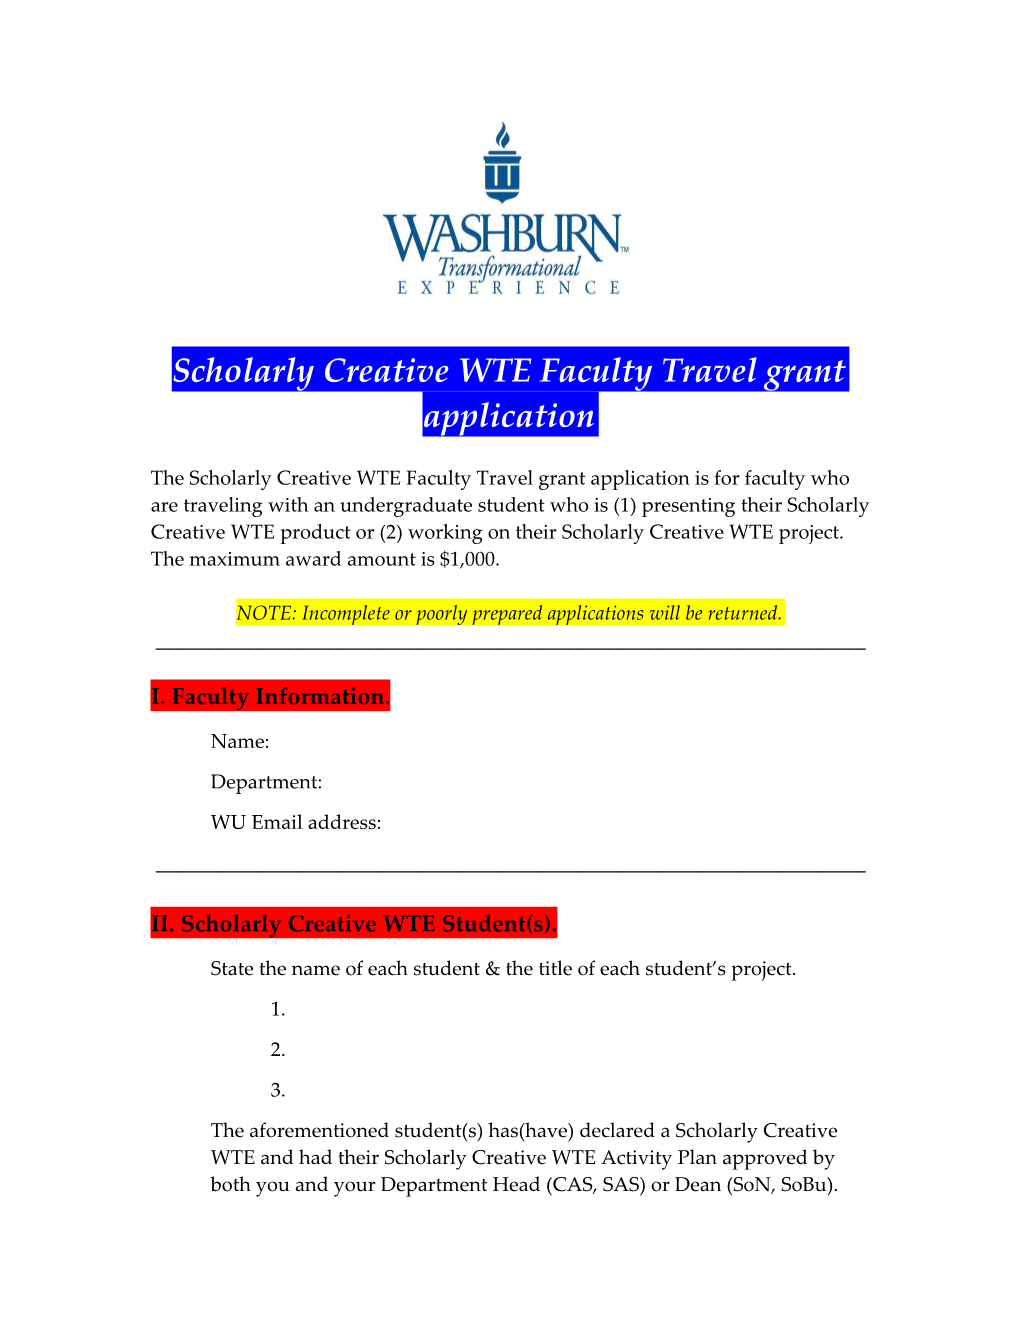 Scholarly Creative WTE Faculty Travel Grant Application